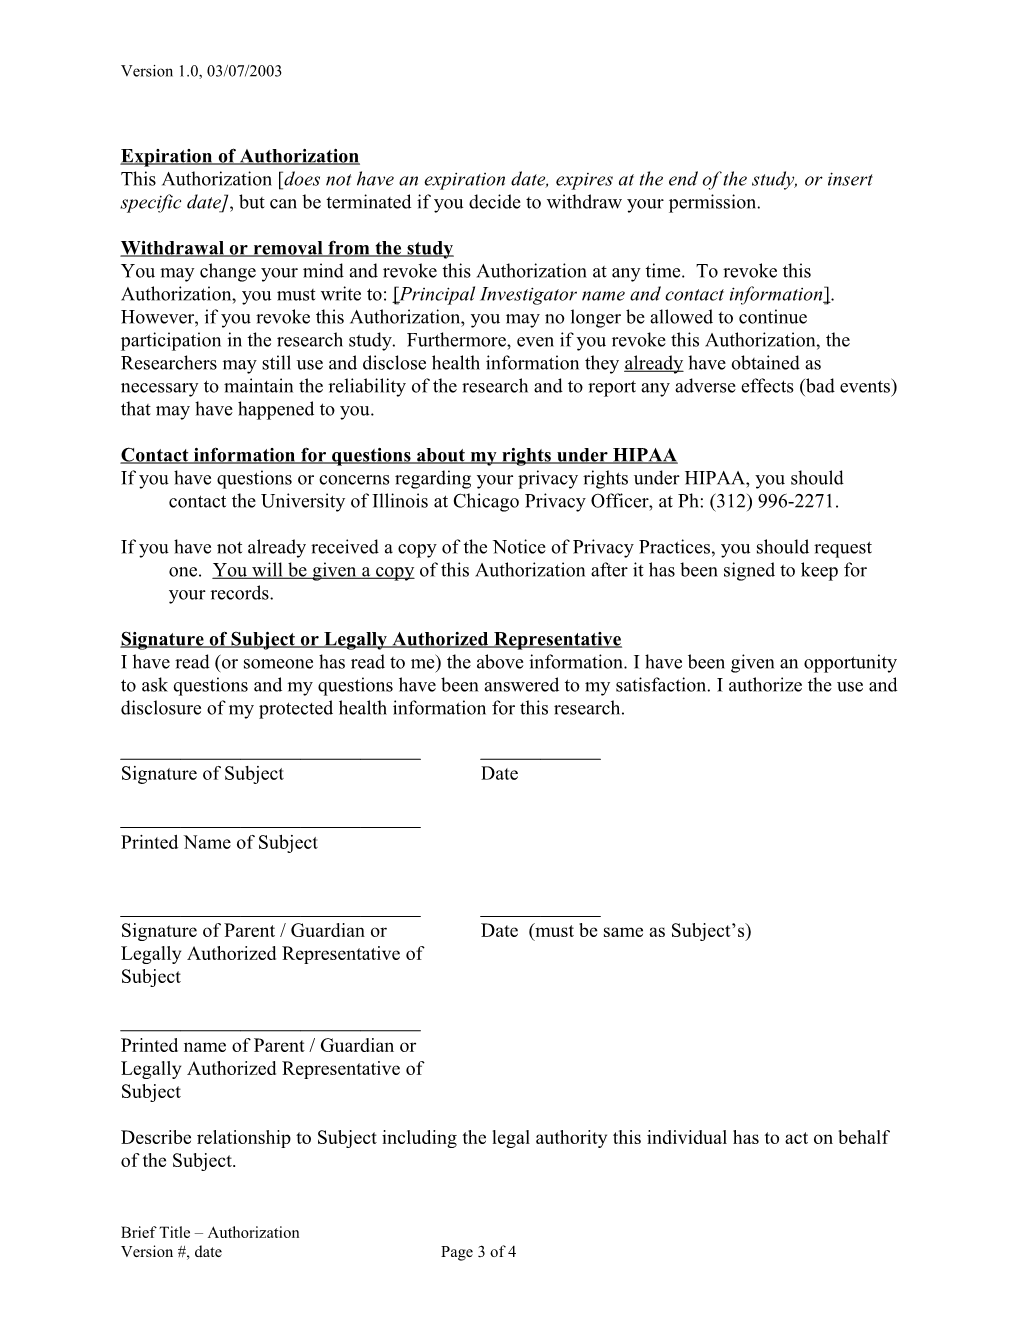 Authorization Ot Use and Disclose Health Information s1